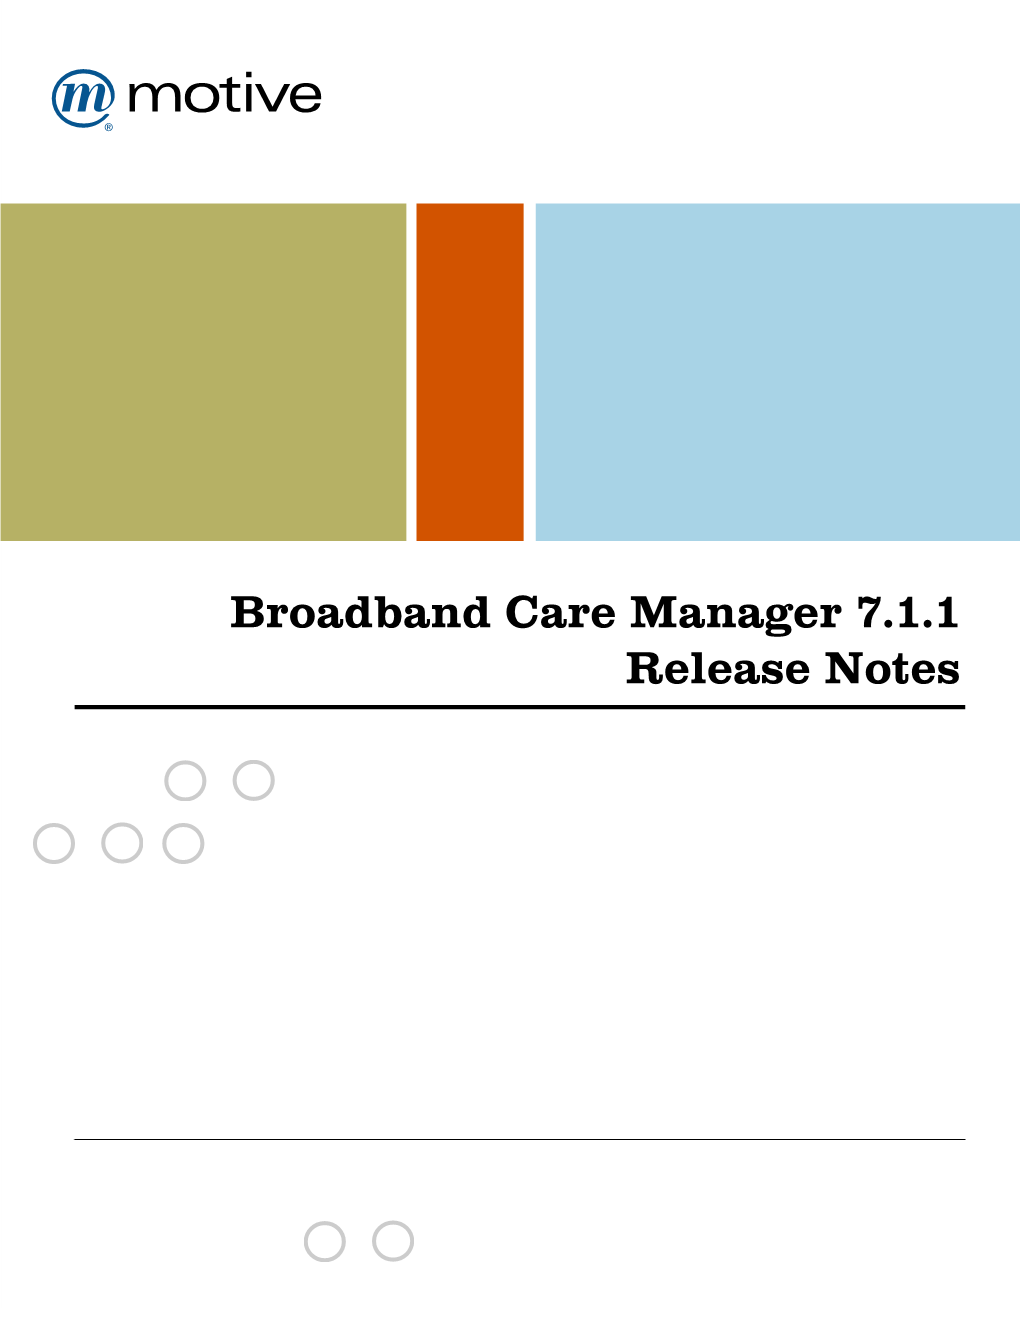 Broadband Care Manager 7.1.1 Release Notes Broadband Care Manager 7.1.1 Release Notes